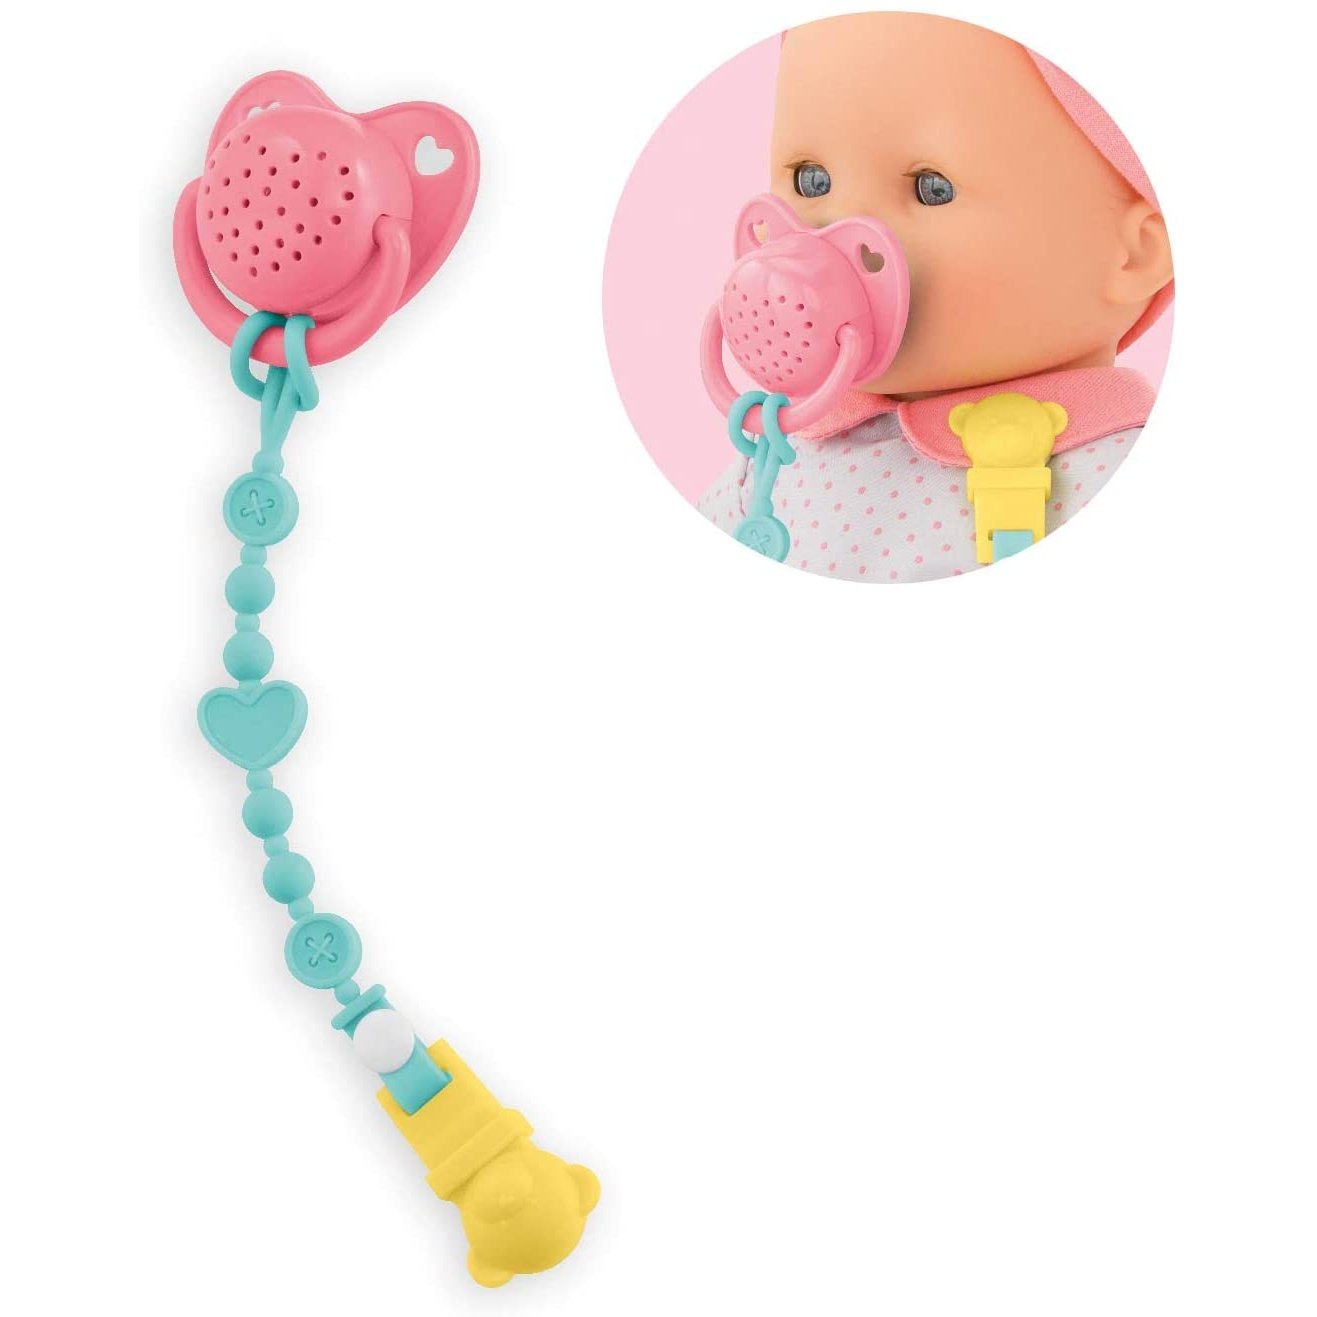 Corolle - Pacifier with 15 Sounds - For 14" Baby Dolls, Pink/Blue-COROLLE-Little Giant Kidz